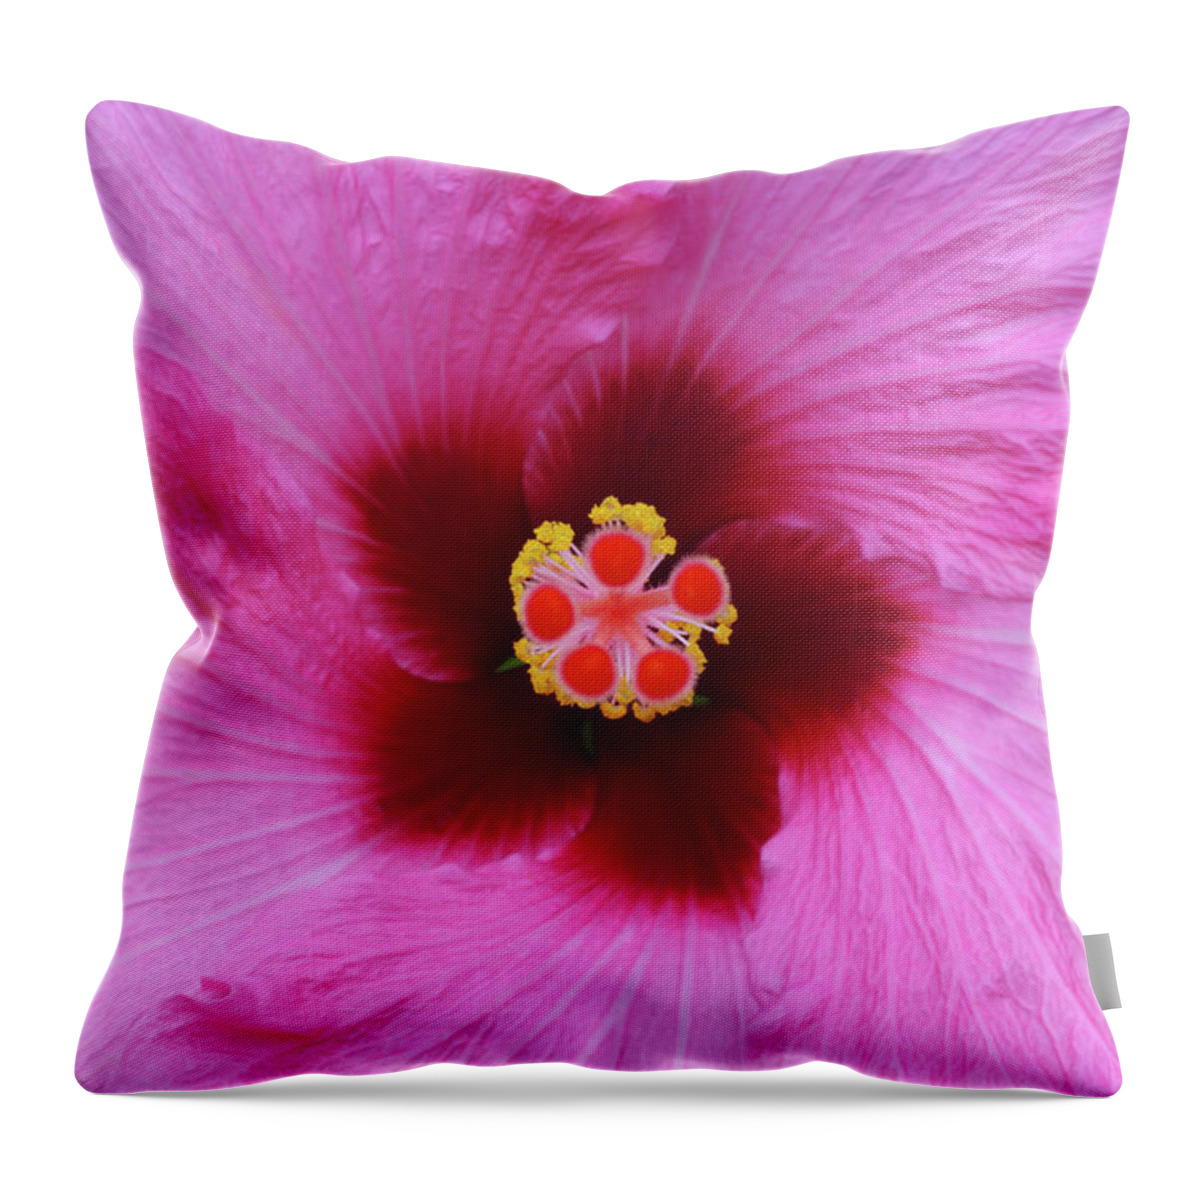 Haslemere Throw Pillow featuring the photograph Crisp Detail At Centre Of Pink Hibiscus by Rosemary Calvert